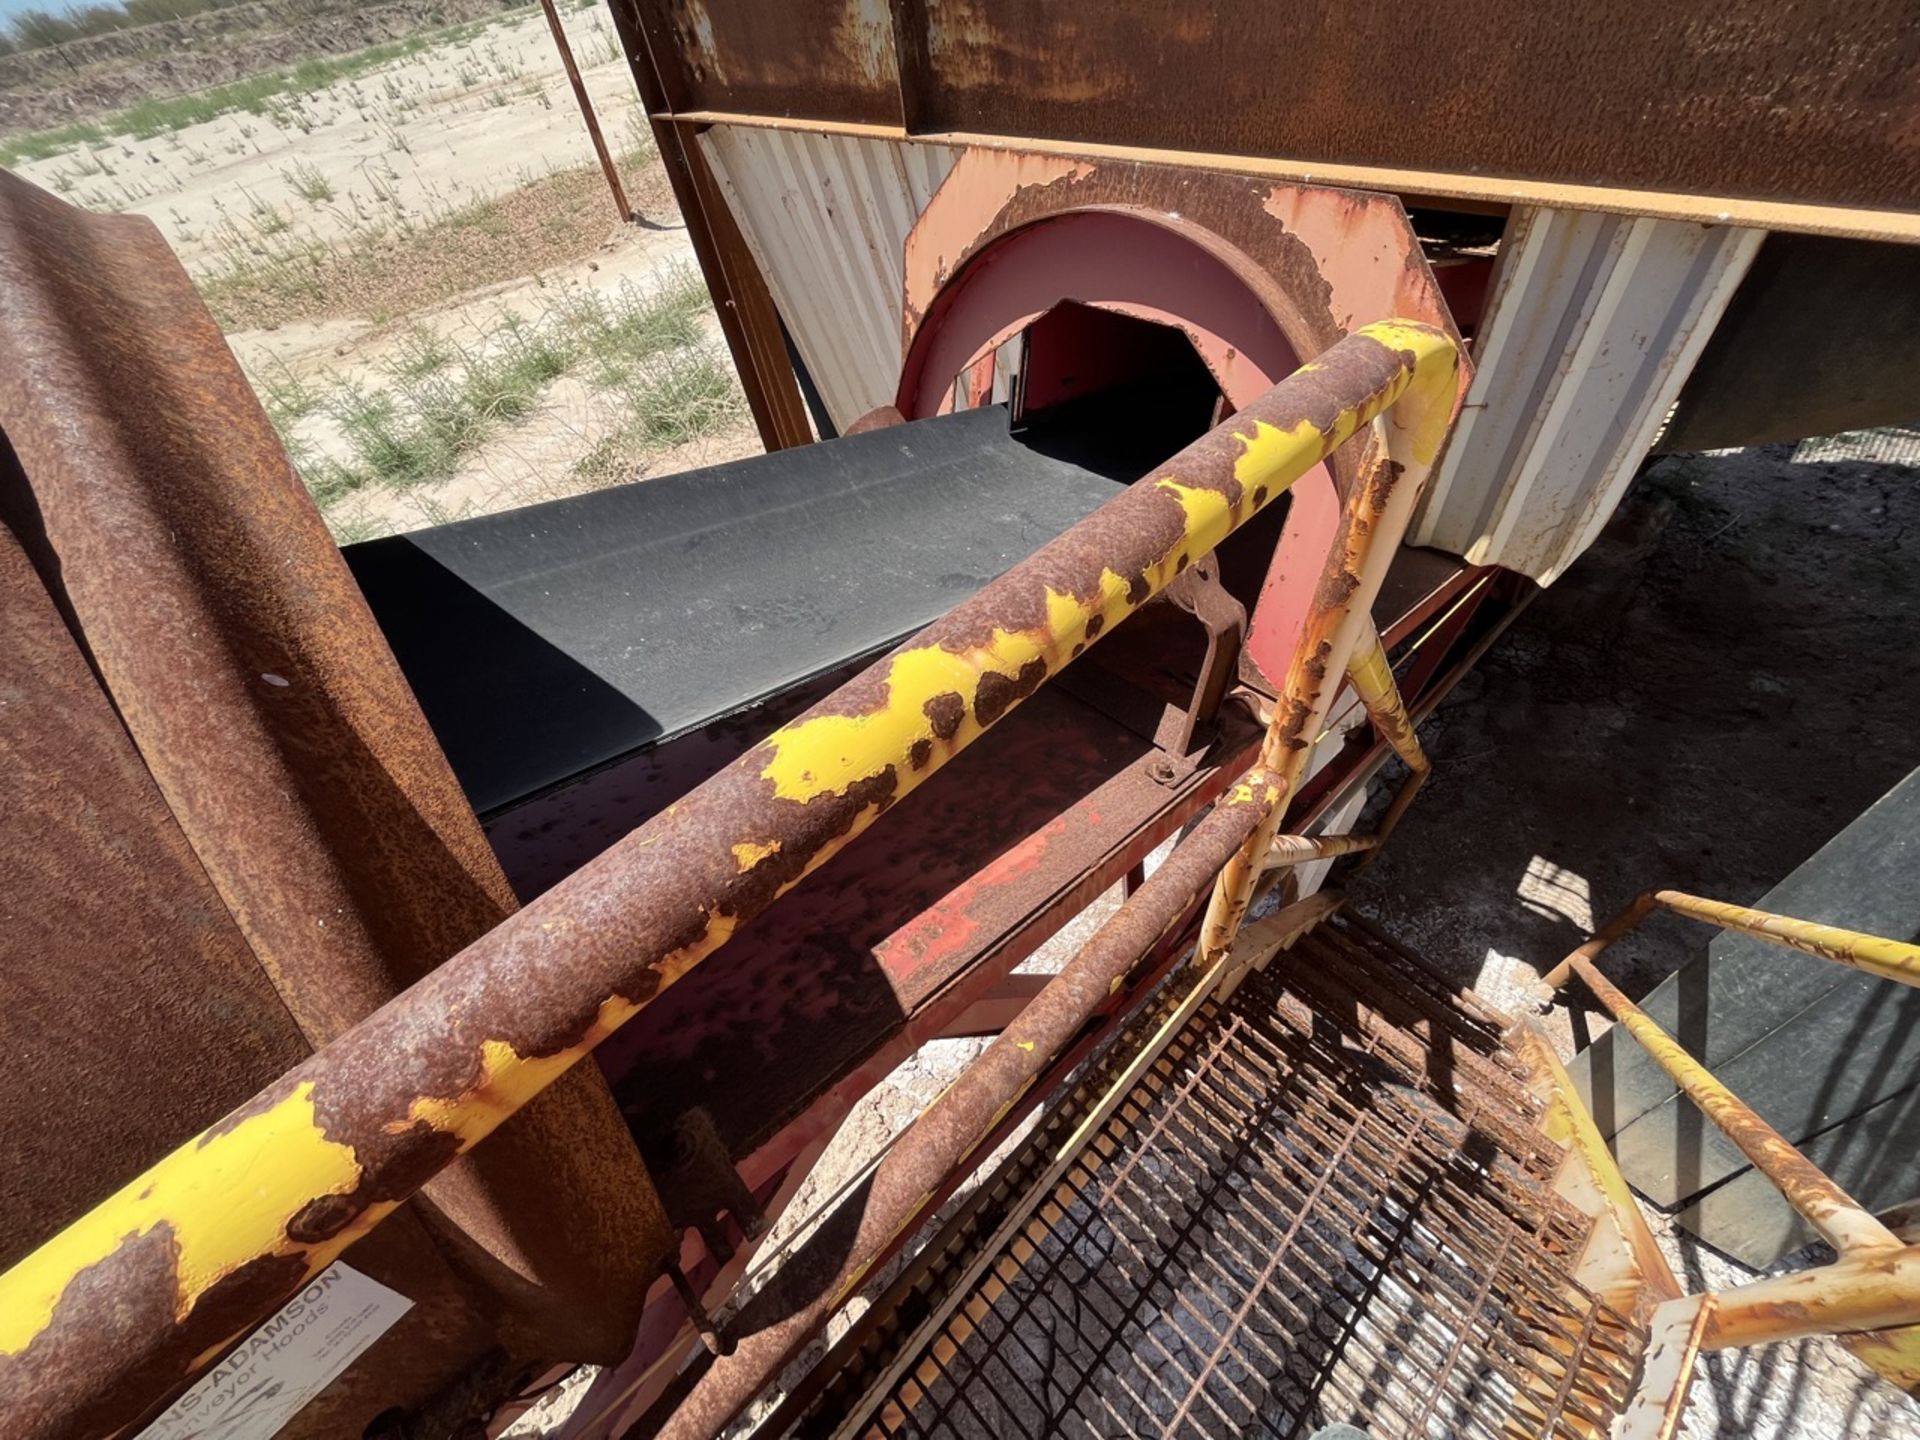 Meco Rubber conveyor belt with rollers, inclined, measuring approximately 60 cm wide x 35 meters lo - Image 46 of 60